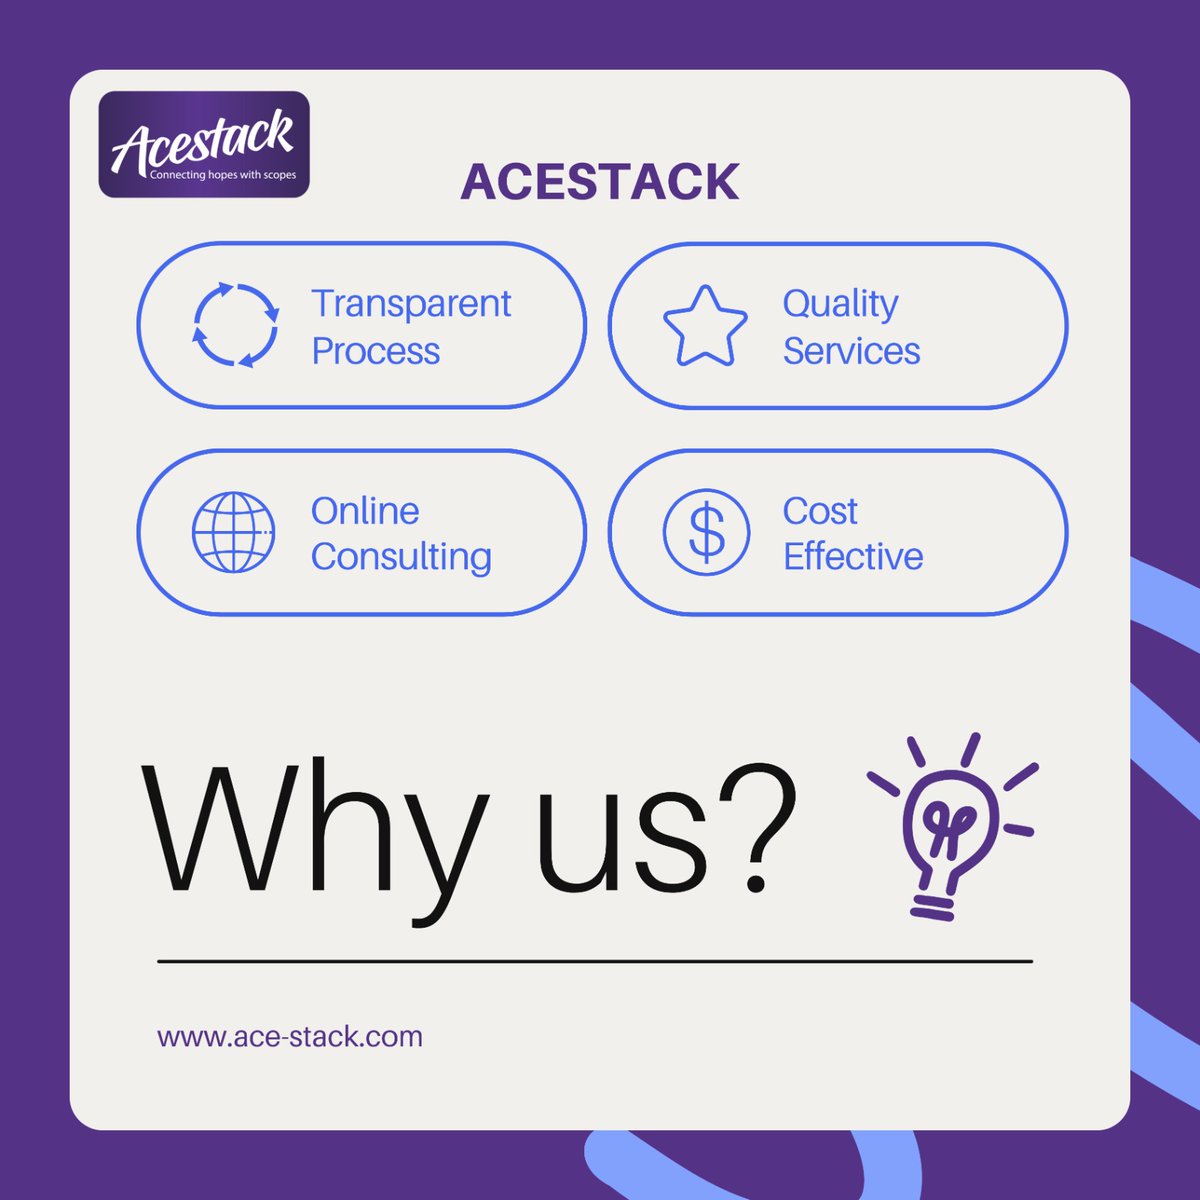 WE ARE A STAFFING AGENCY . IF YOU ARE LOOKING FOR NEW JOB CONNECT US ON :- HR@ACE-STACK.COM .
Follow for more :- @acestack_llc
Visit Us : -
lnkd.in/gcUyaFGC
#healthcarejobs #healthcare #jobs #healthcareworkers #healthcareprofessionals #healthcareprofessional #jobsearch